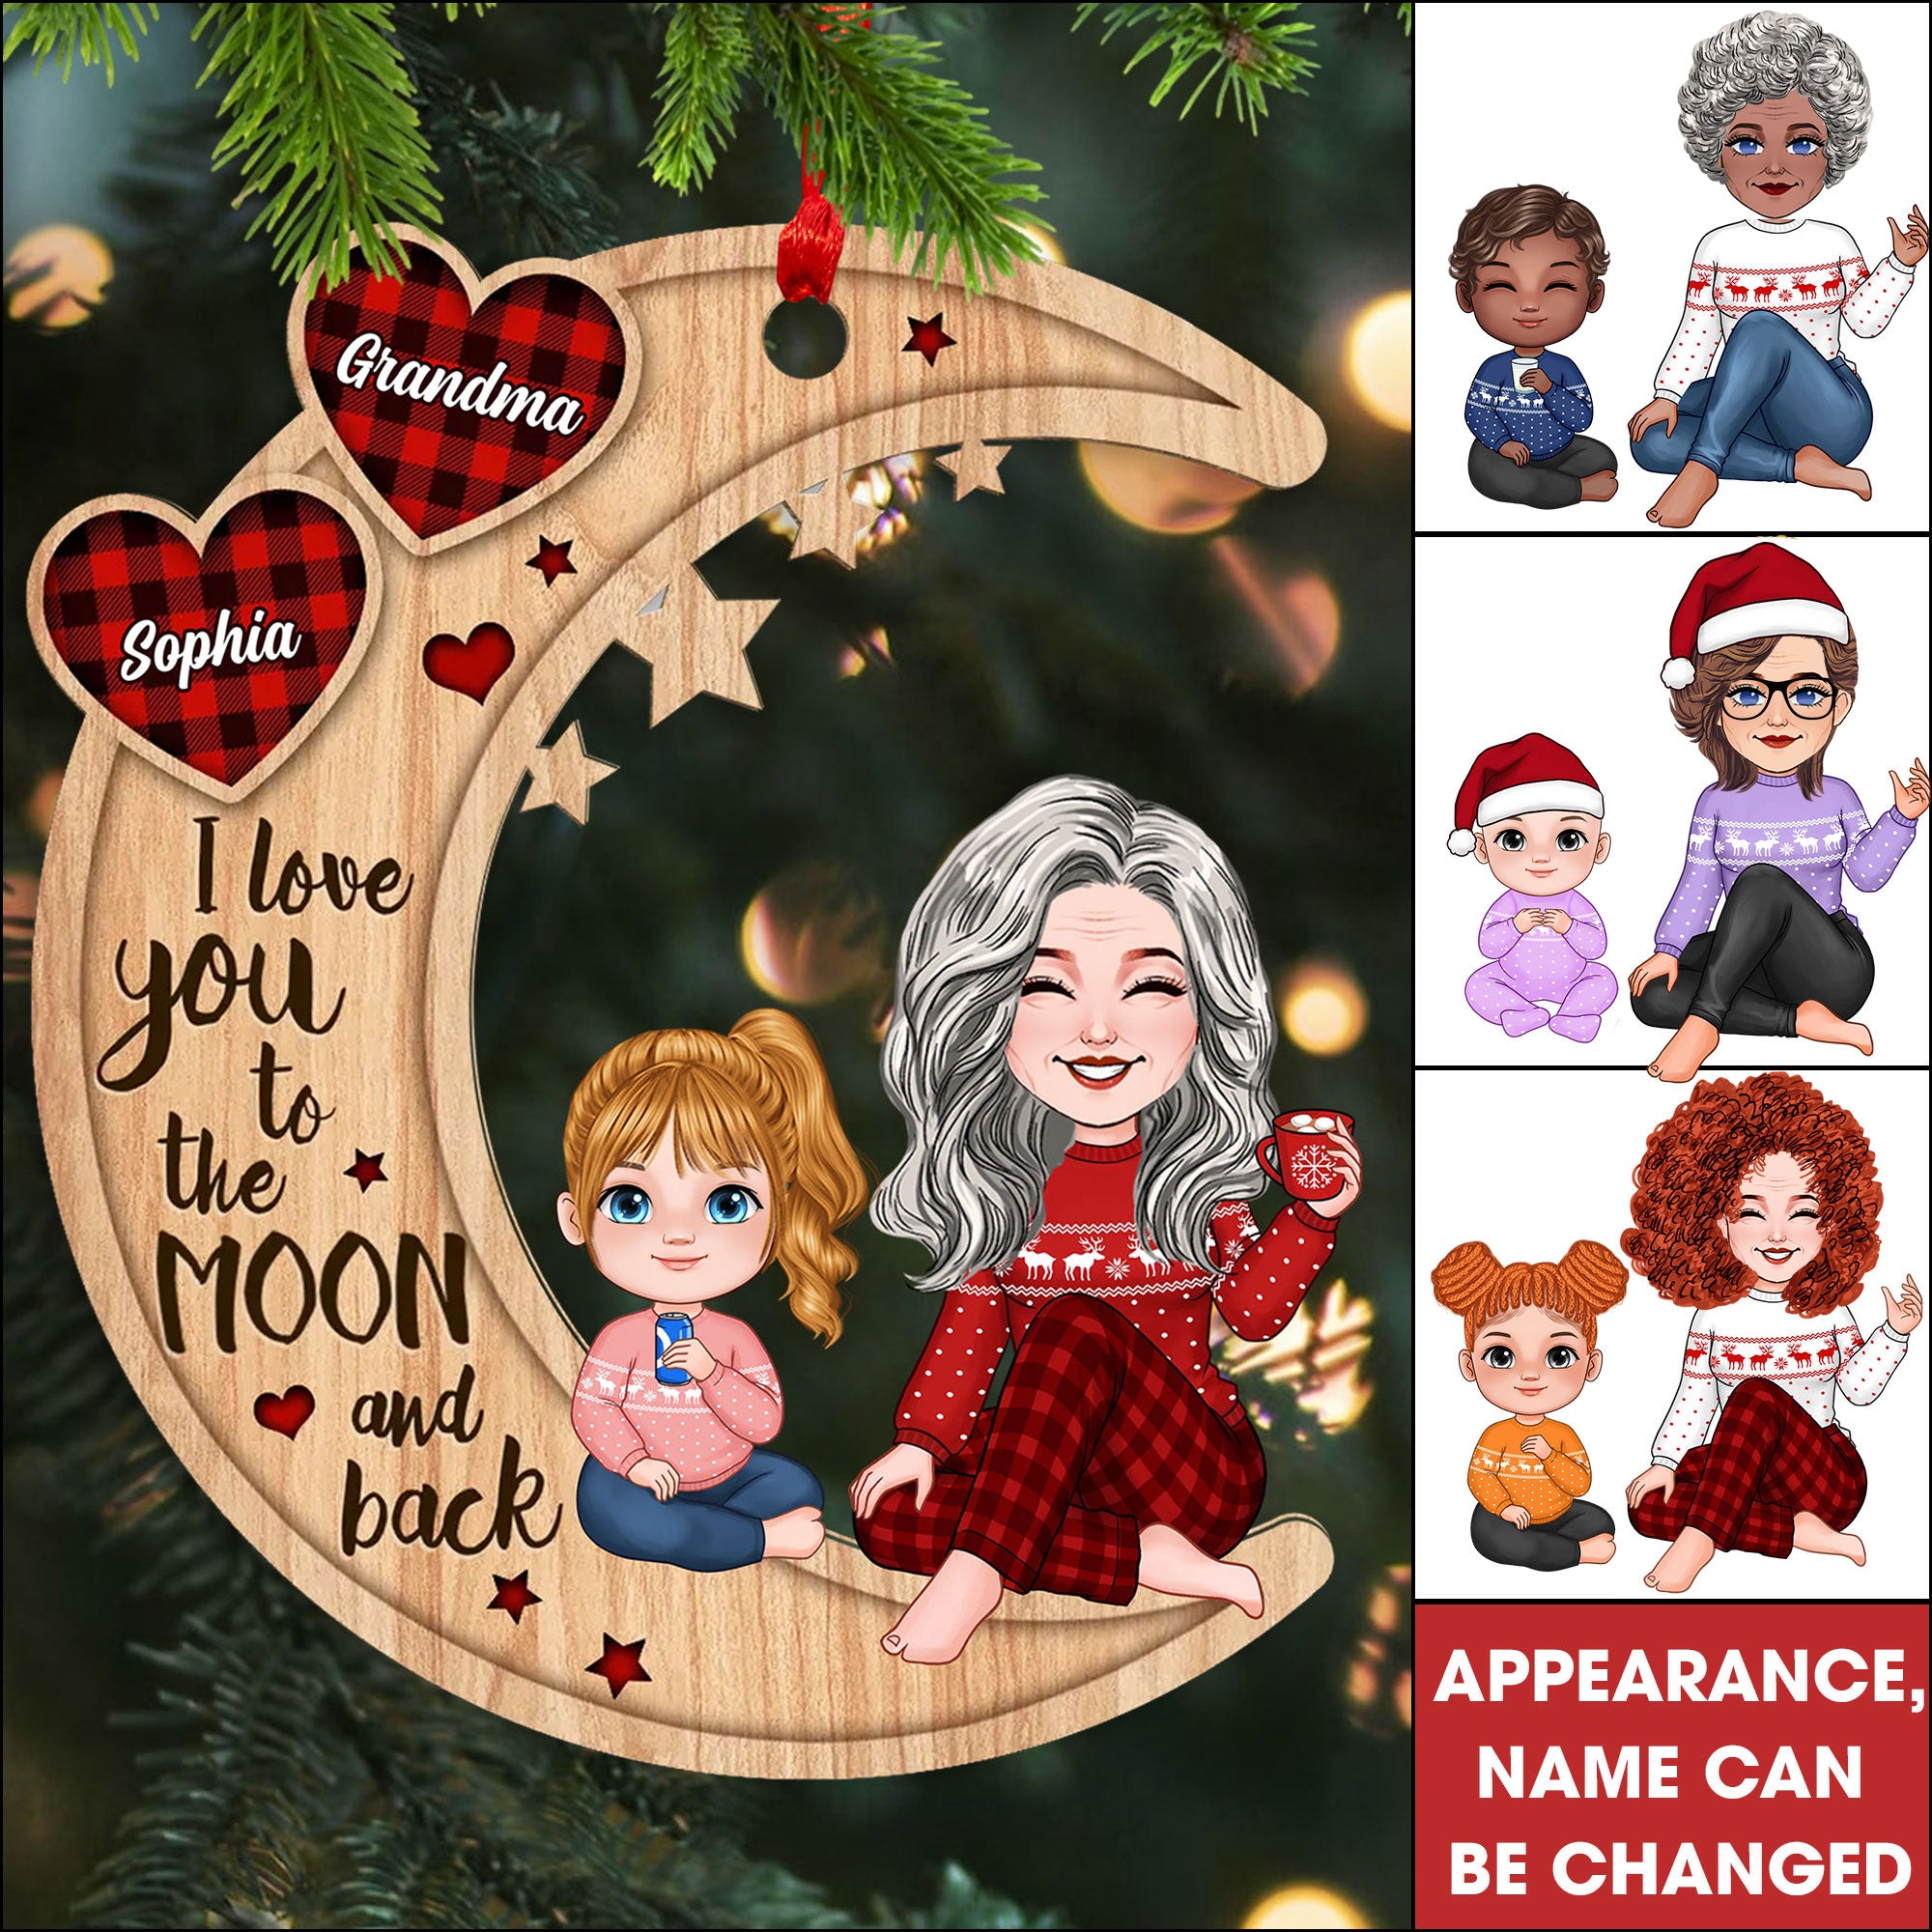 Cute Grandma & Grandkid Checkered Pattern Heart Love To The Moon - Gift For Granddaughter Grandson Personalized 2-Layered Wooden Ornament